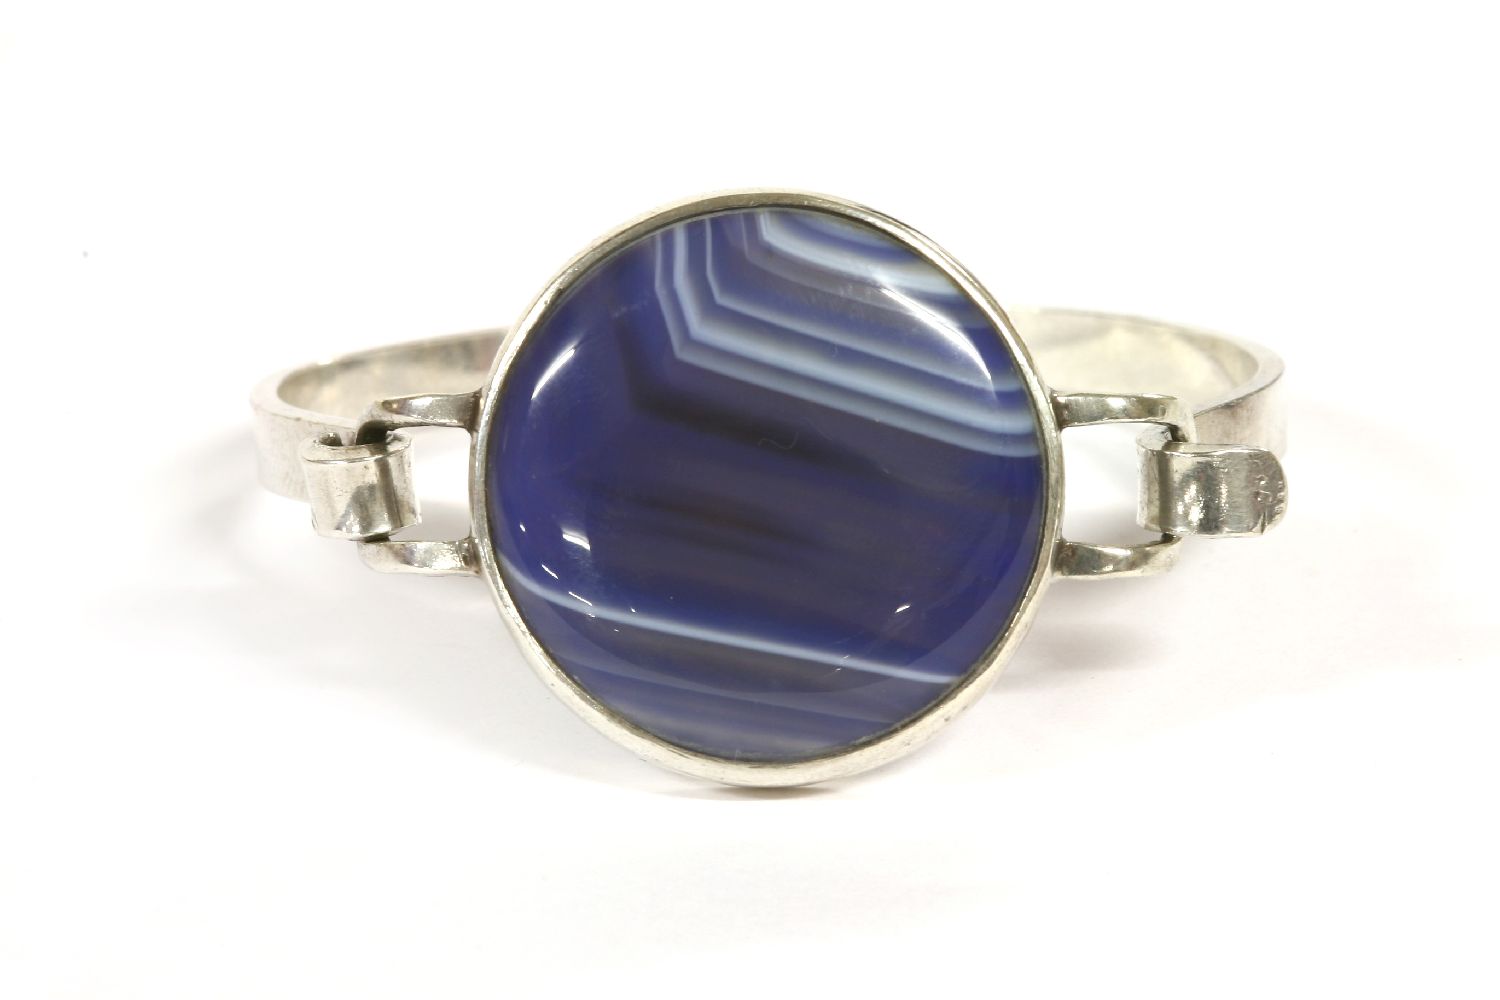 A sterling silver agate bangle, by Daedalus Ltd, c.1970, with a circular banded agate plaque, rub